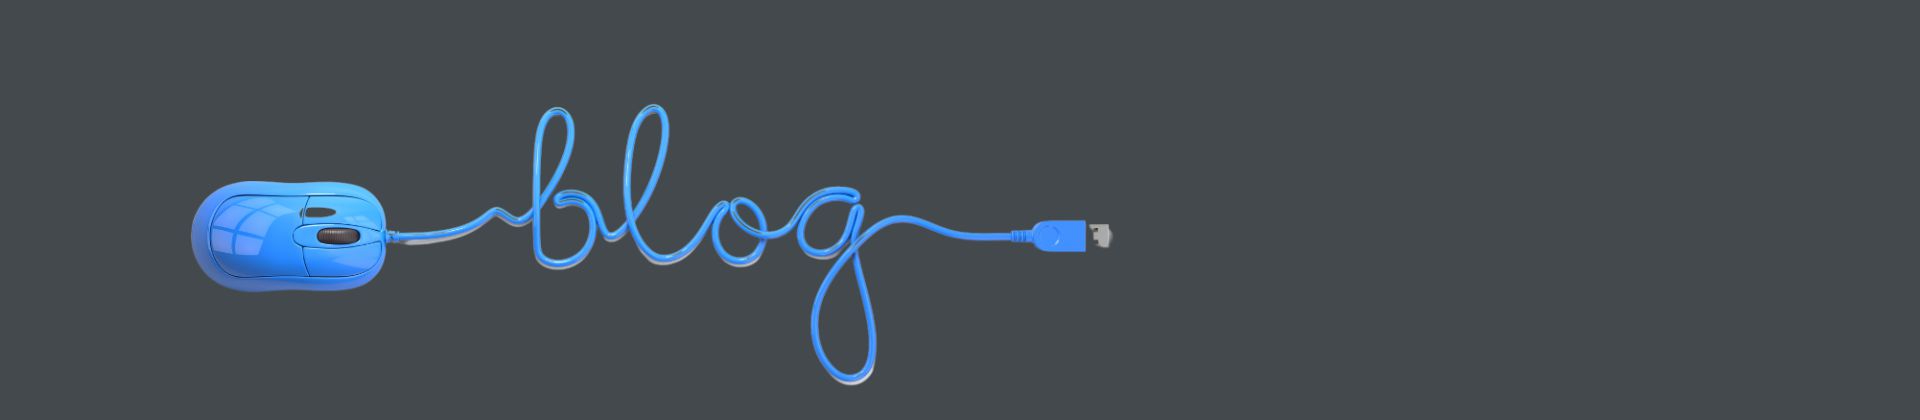 Image of a blue computer mouse and its cord has been twisted like the word ‘blog’